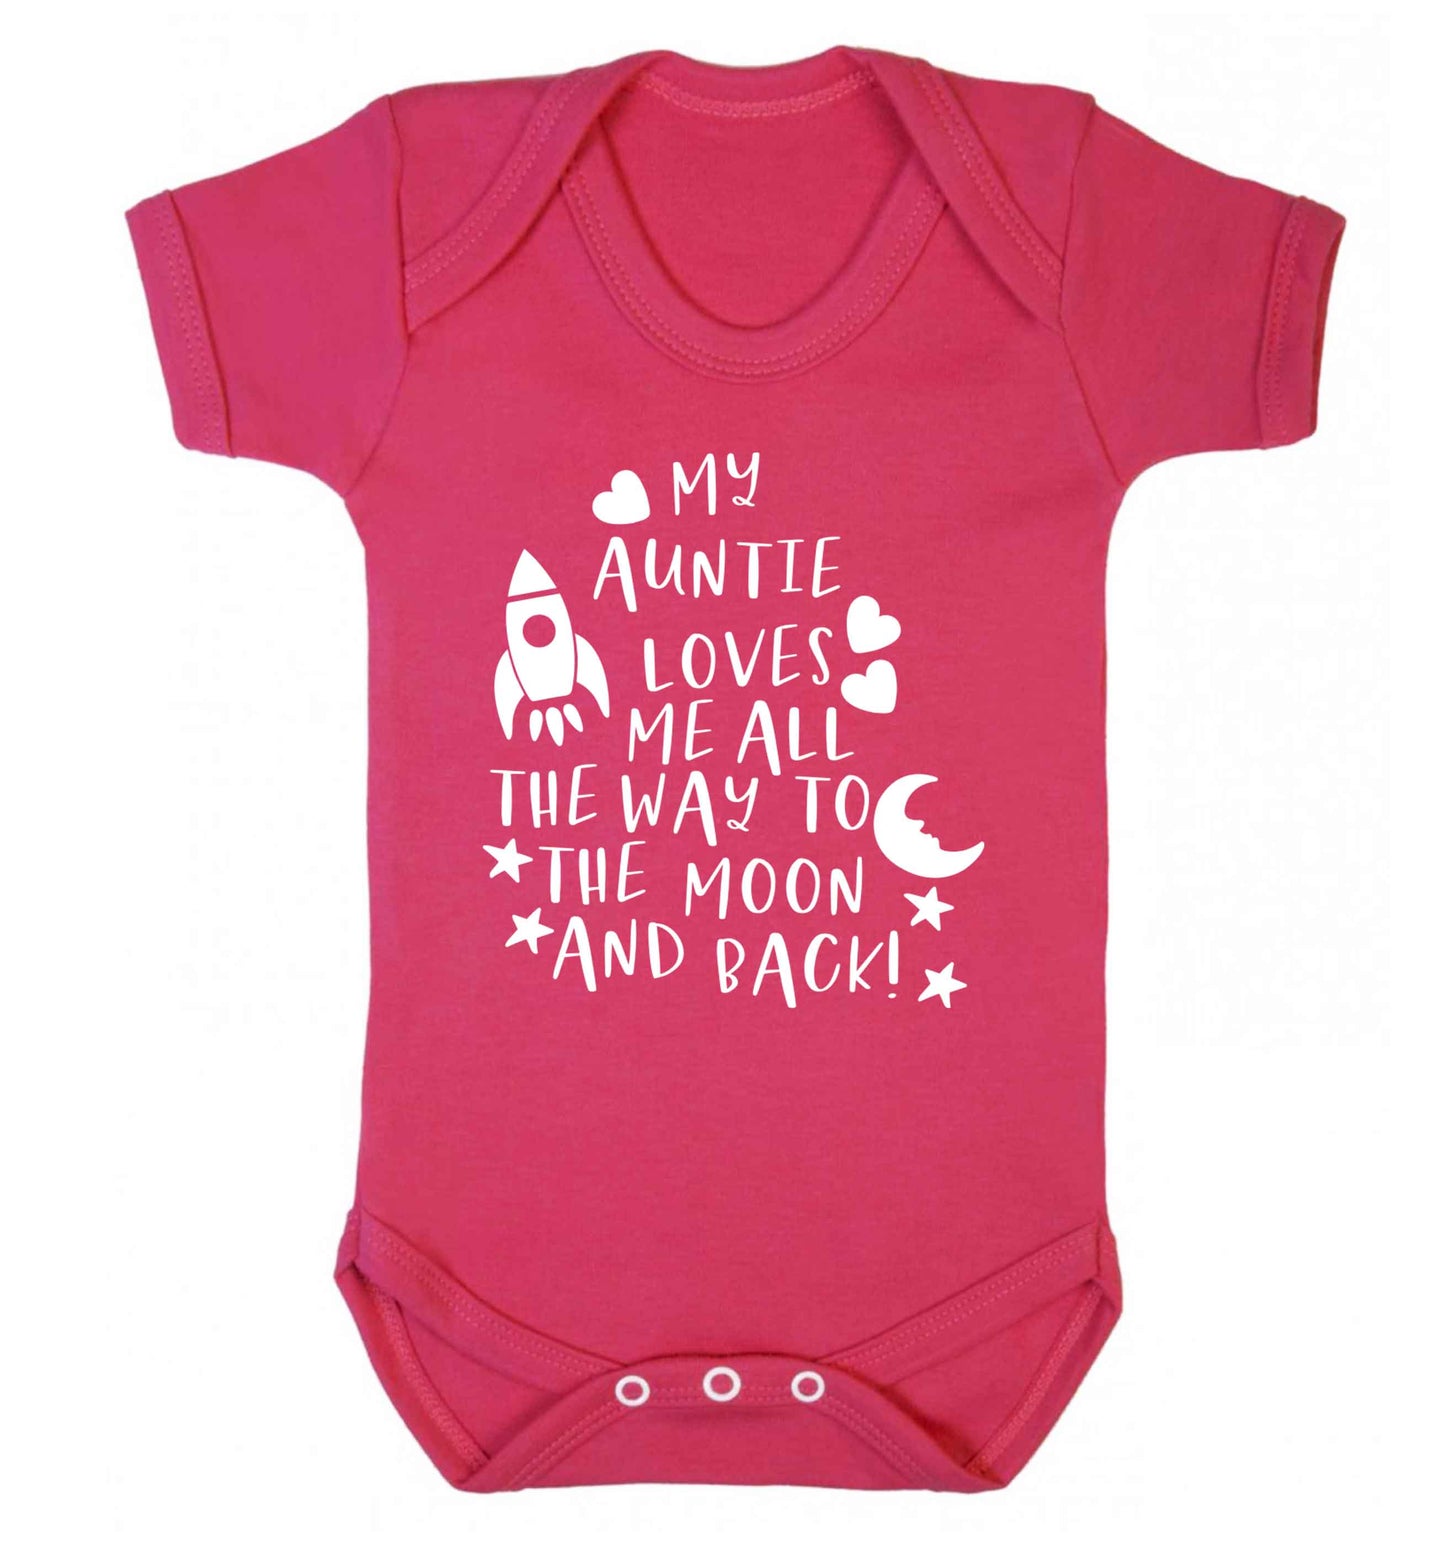 My auntie loves me all the way to the moon and back Baby Vest dark pink 18-24 months